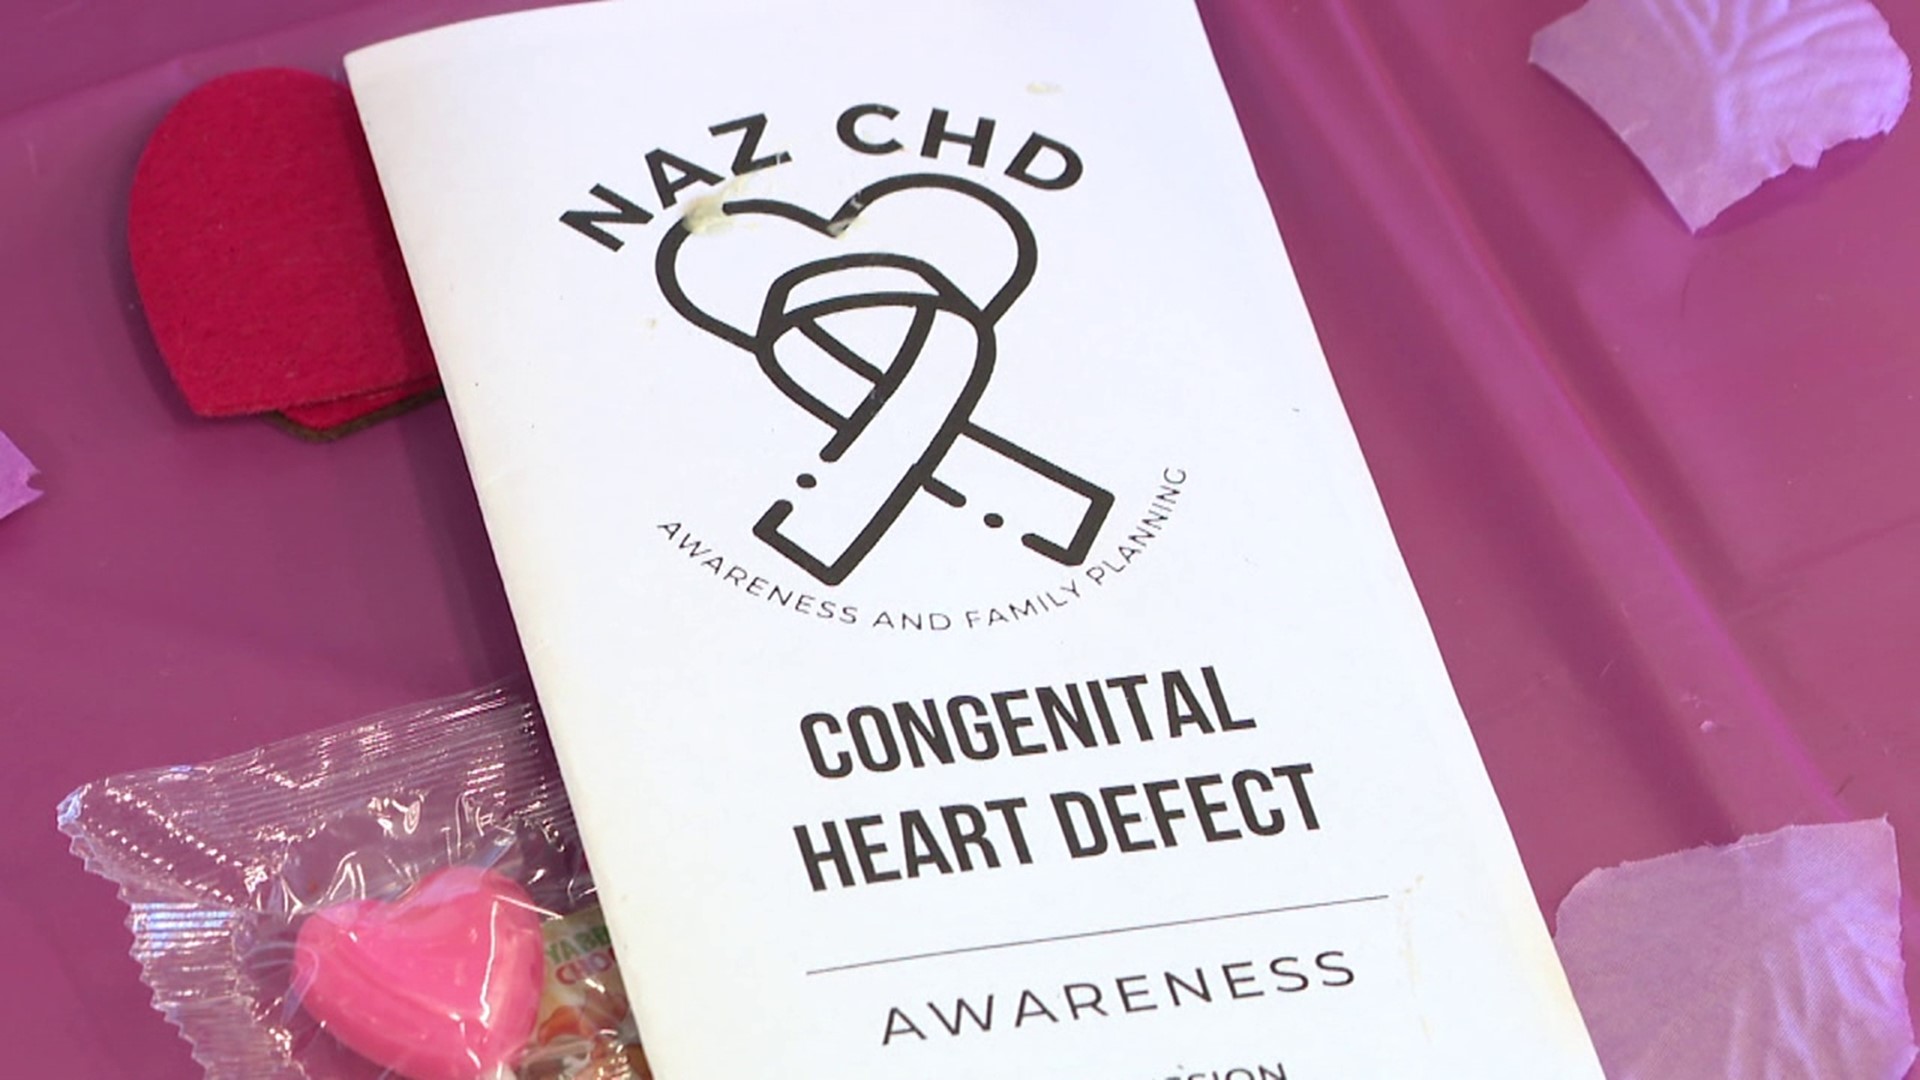 February is American Heart Month, and one group in Luzerne County is raising money for congenital heart defect awareness.